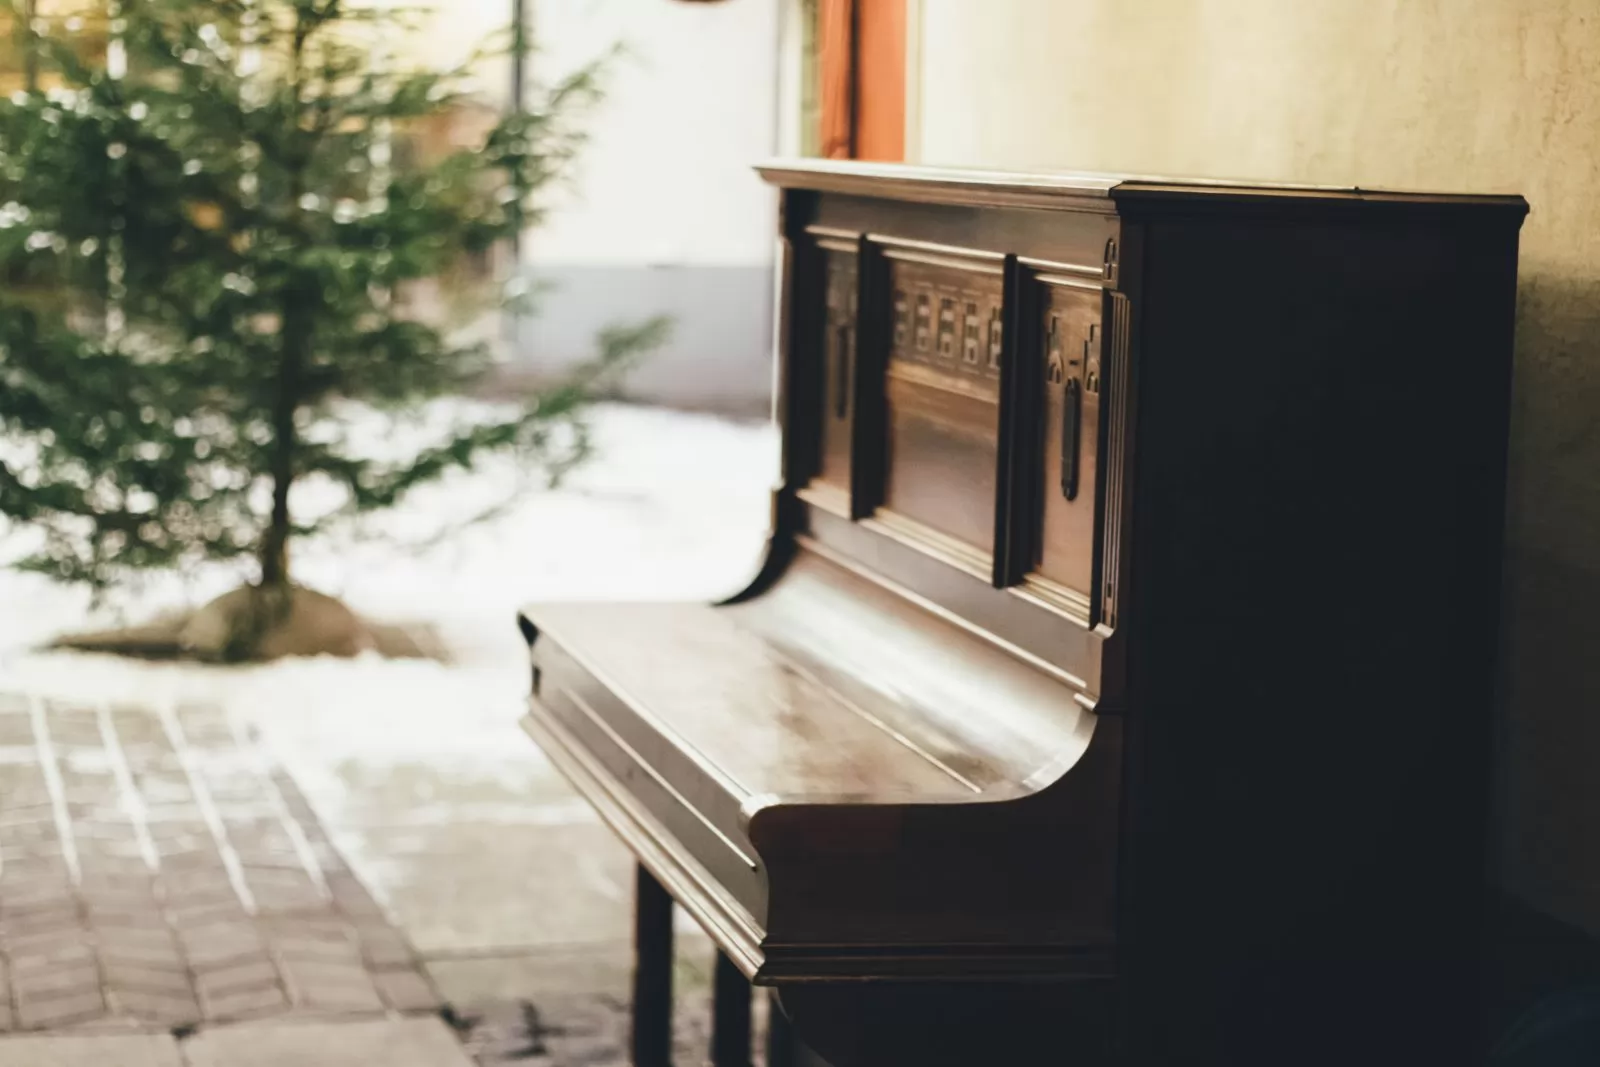 What’s the difference between an upright and grand piano?